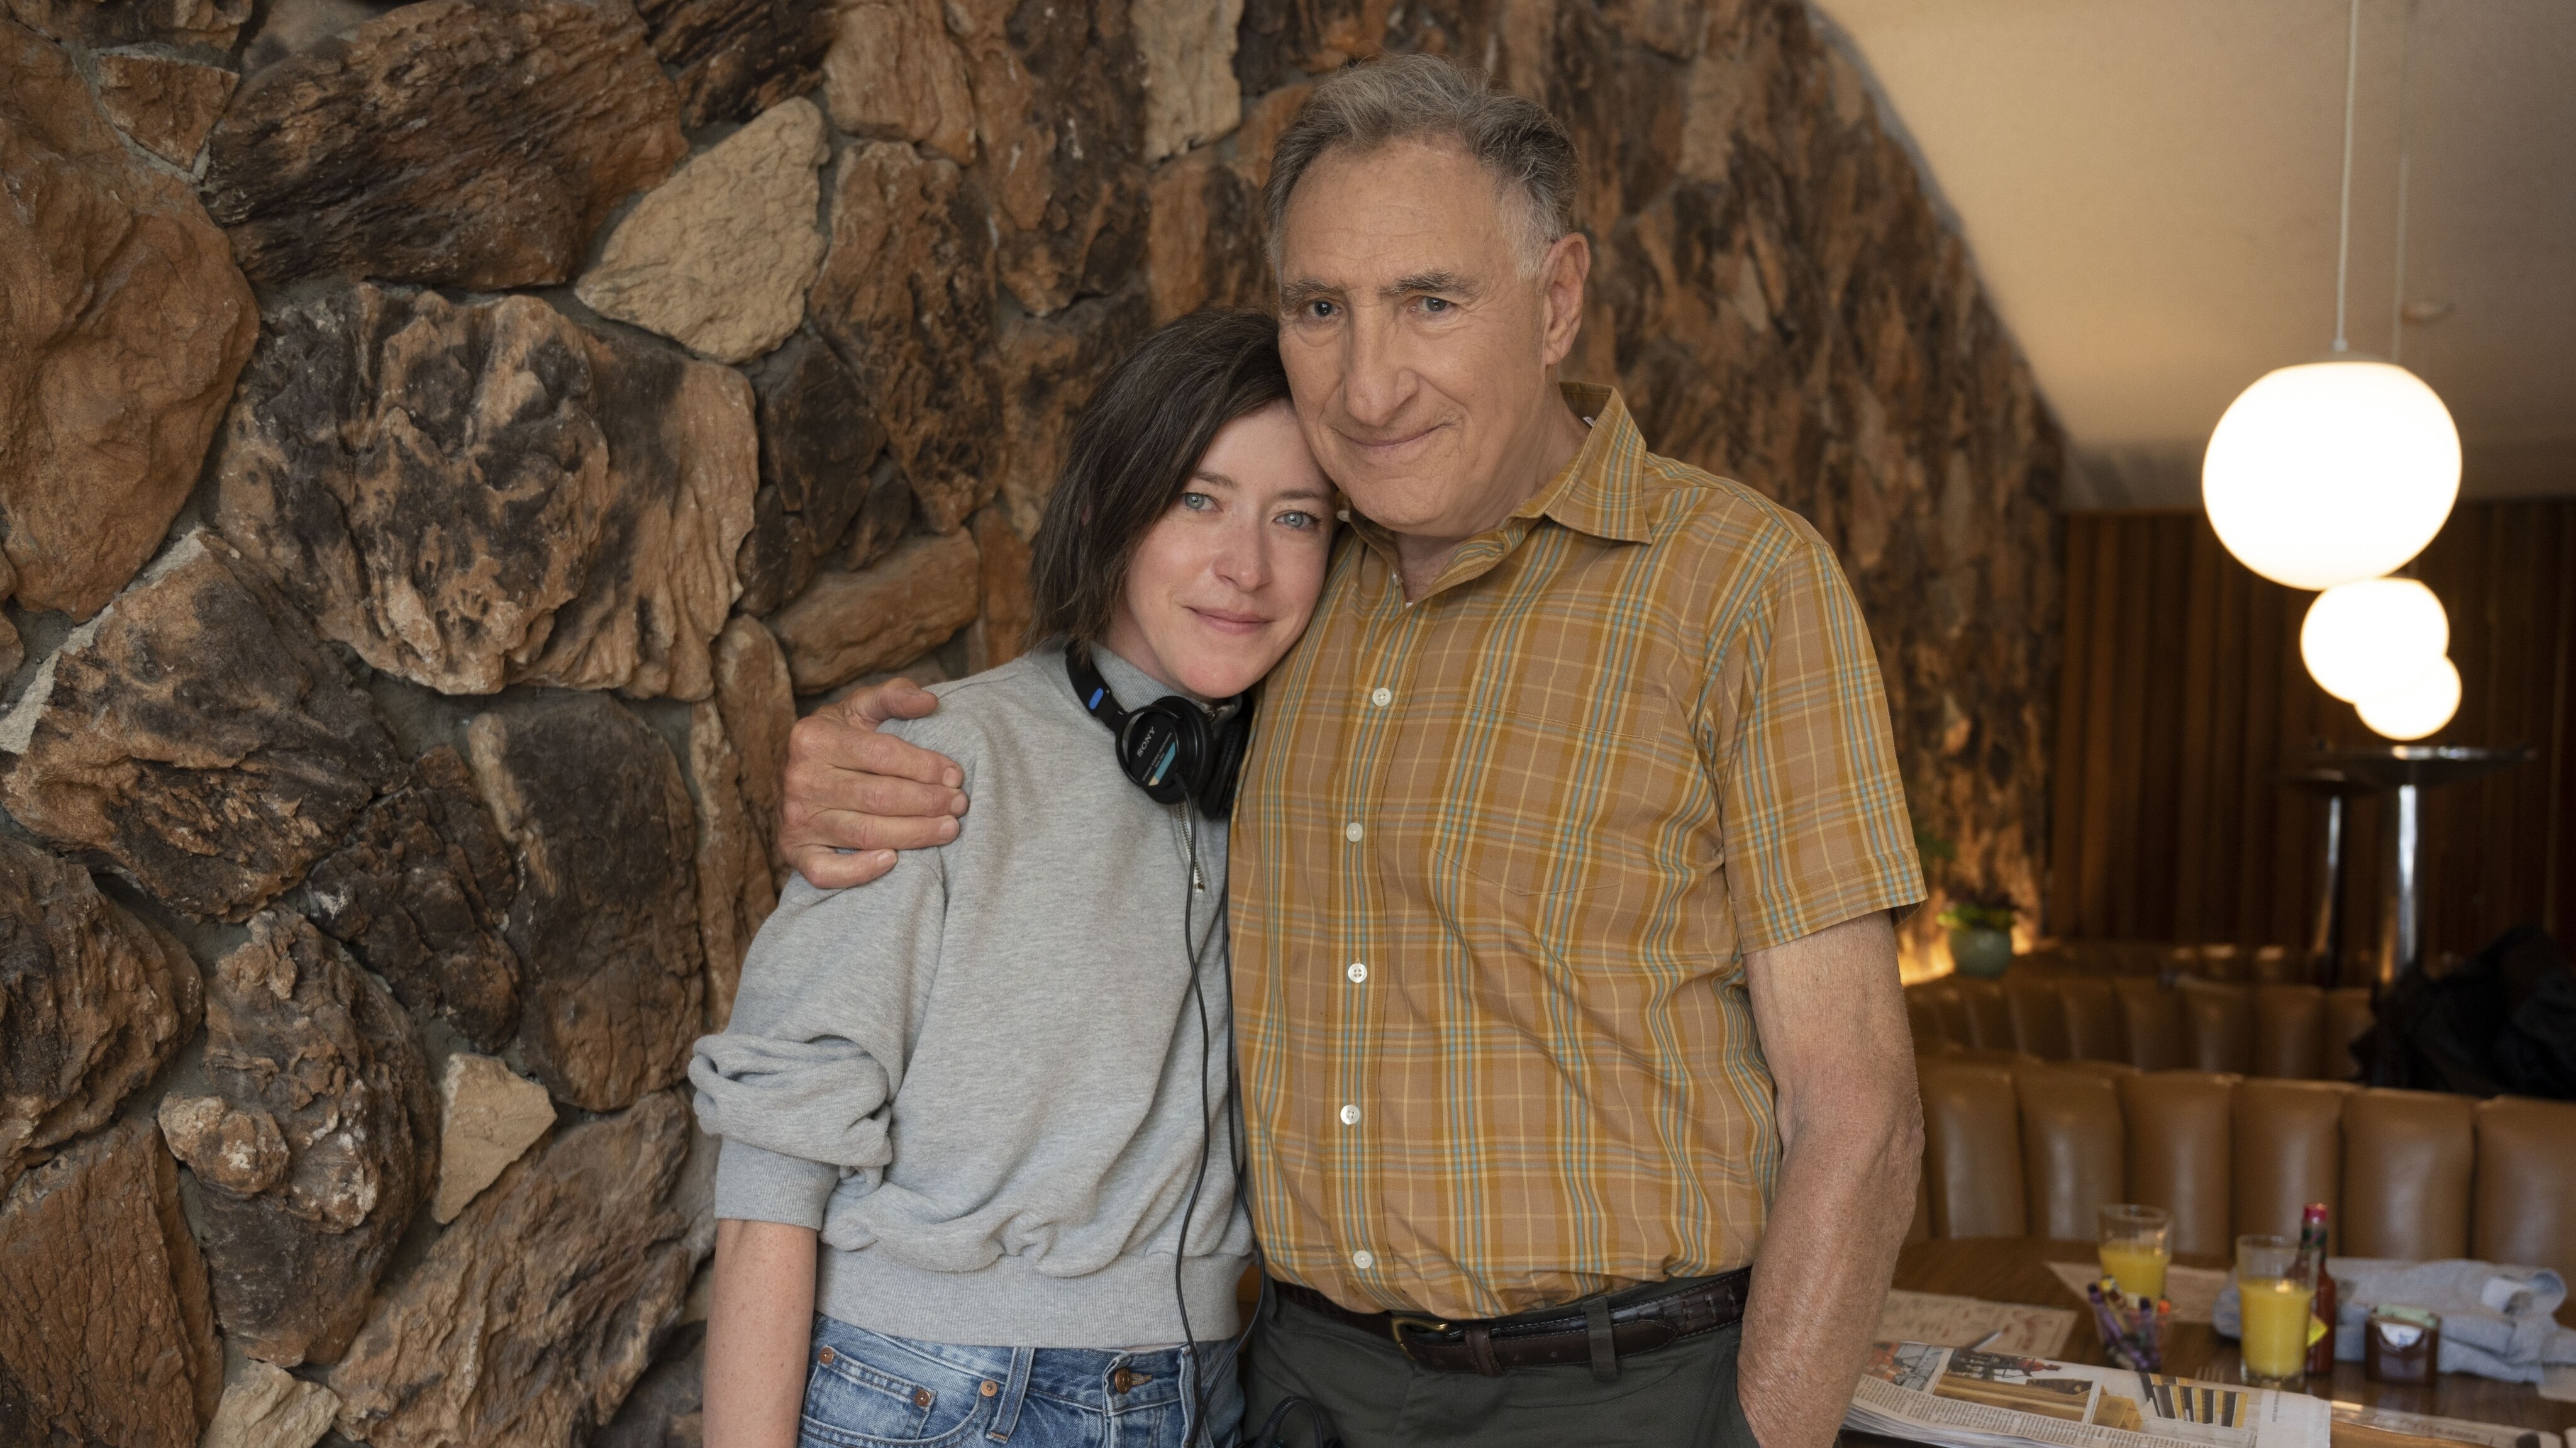 (L-R): Director Julia Hart and Judd Hirsch as Mr. Mitchell behind the scenes of Disney's live-action HOLLYWOOD STARGIRL, exclusively on Disney+. Photo by Suzanne Tenner. © 2022 Disney Enterprises, Inc. All Rights Reserved.